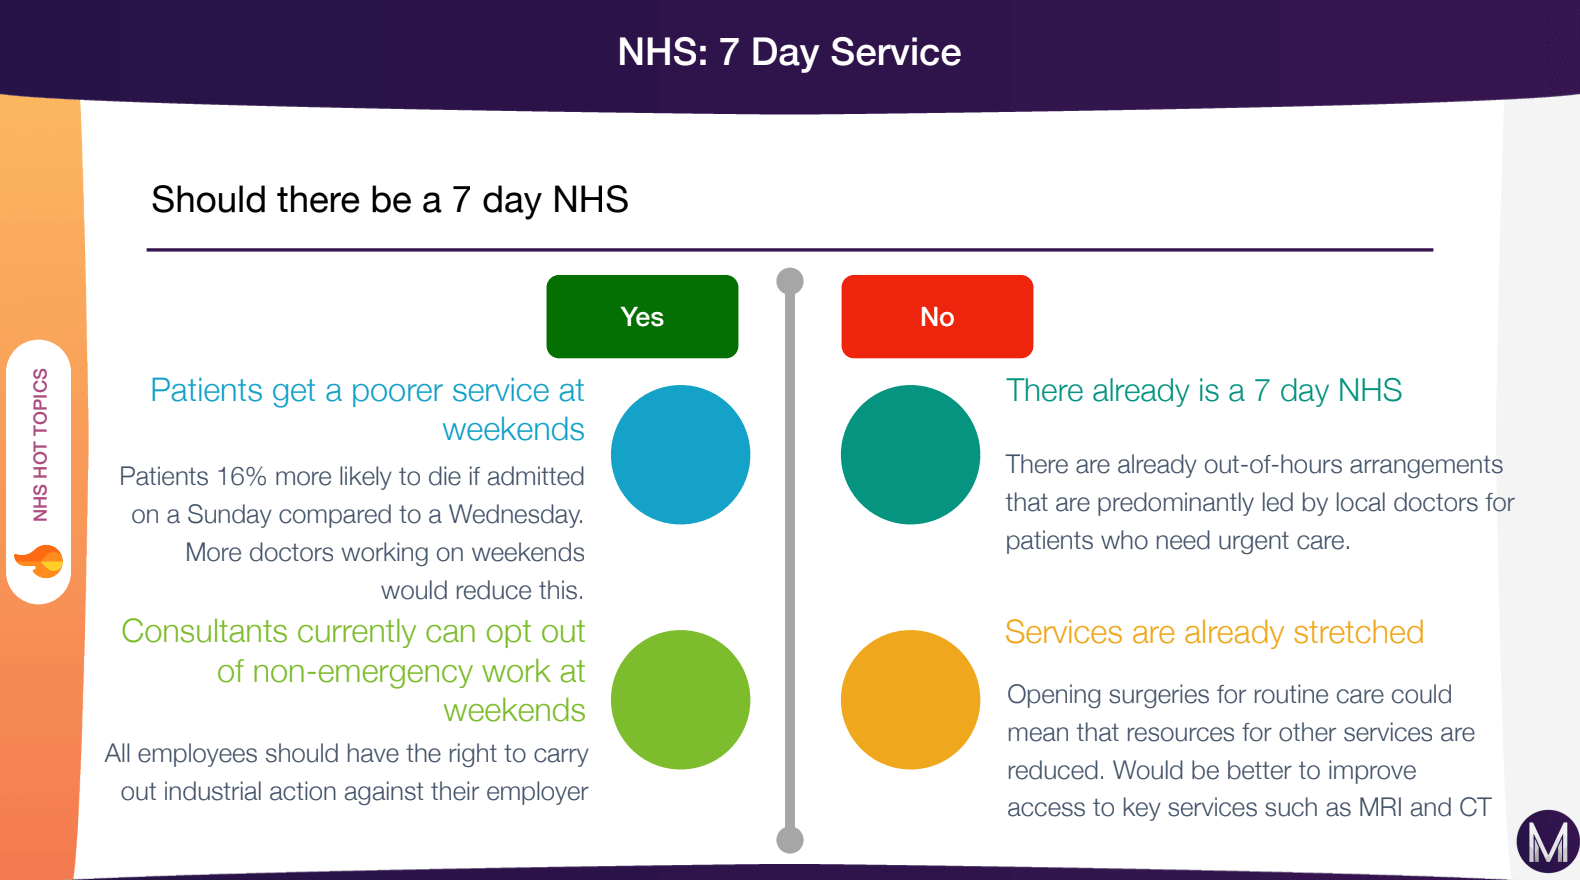 7 Day NHS